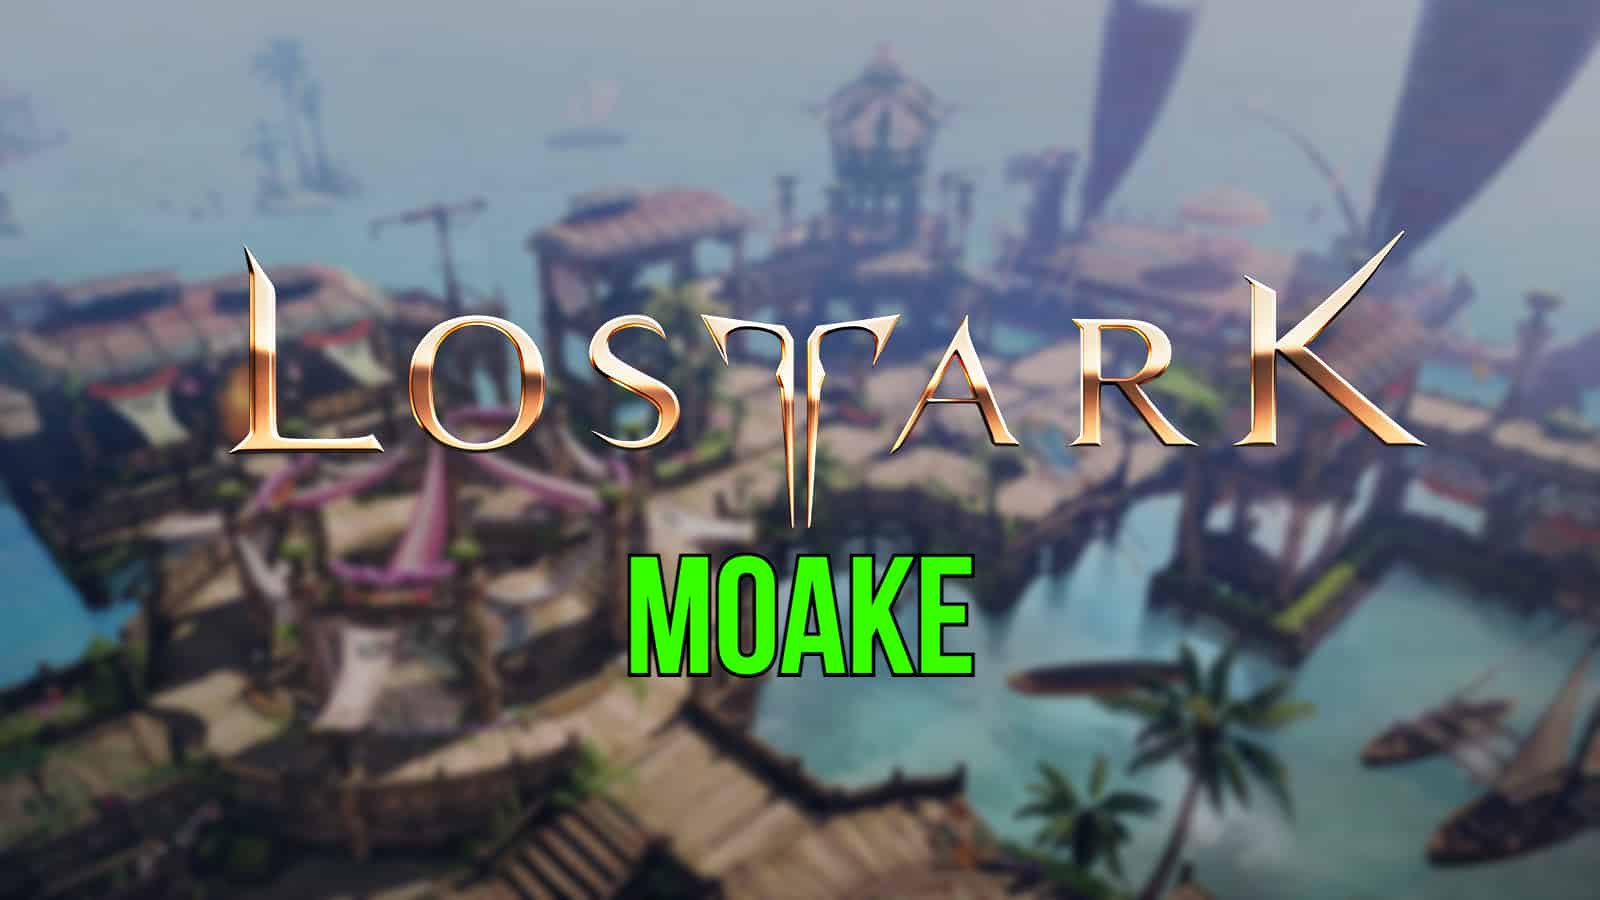 lost ark moake guide